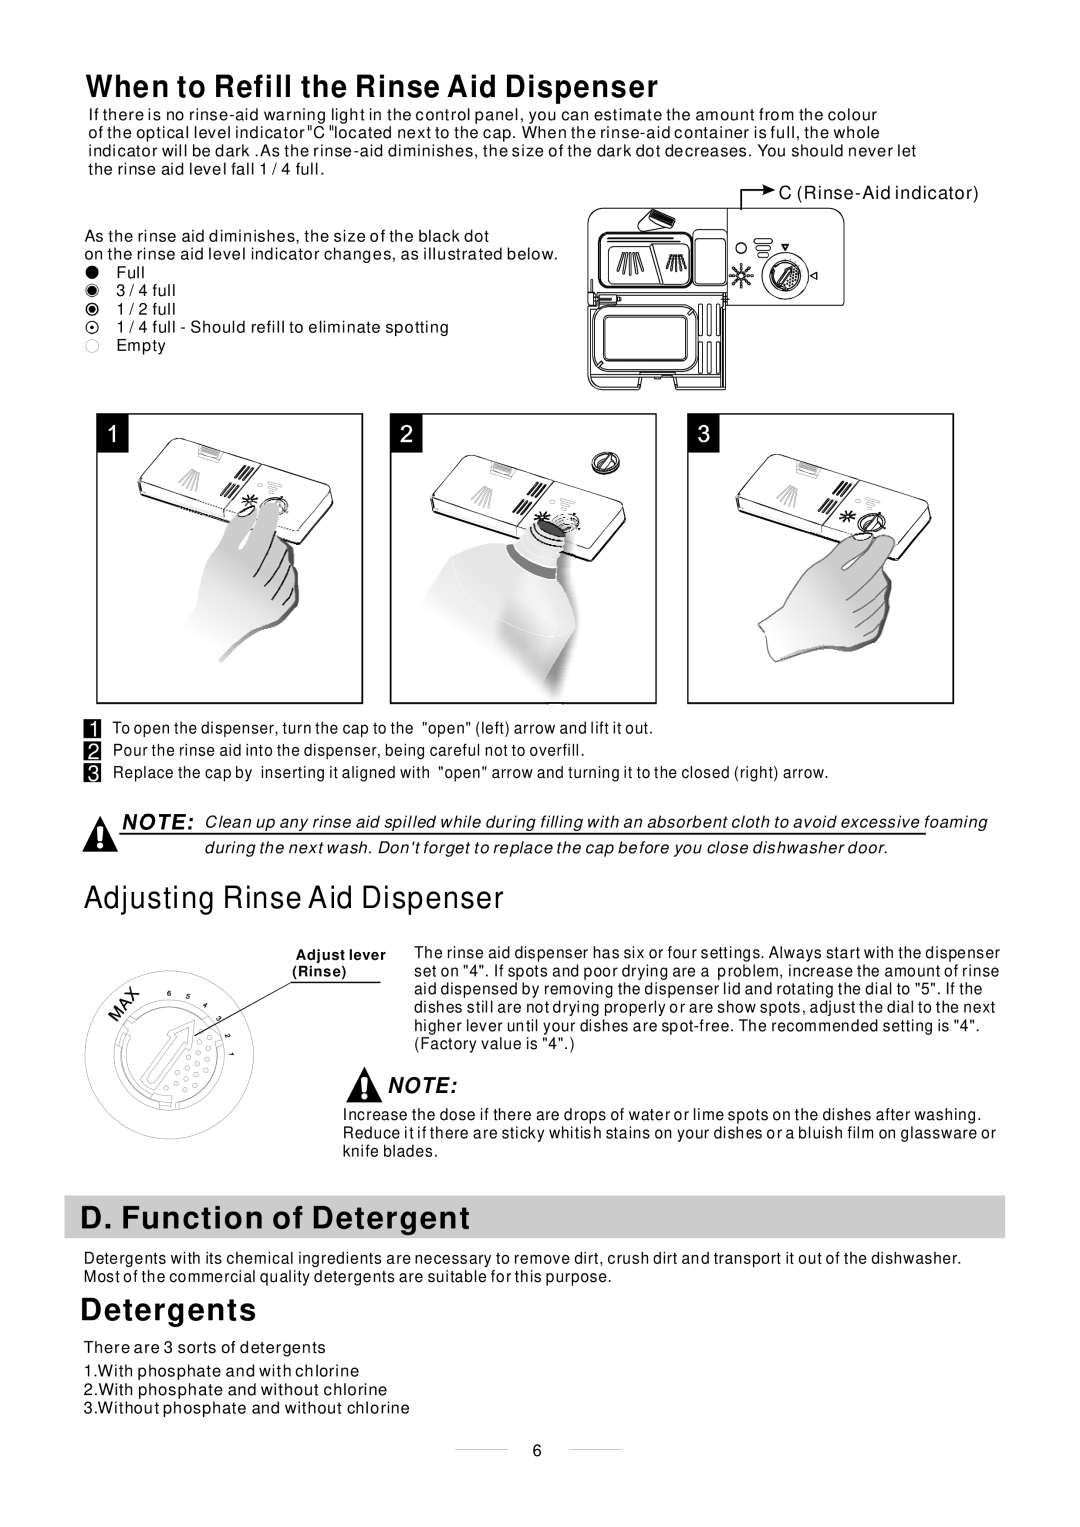 Whirlpool ADP 451 manual When to Refill the Rinse Aid Dispenser, Adjusting Rinse Aid Dispenser, D. Function of Detergent 